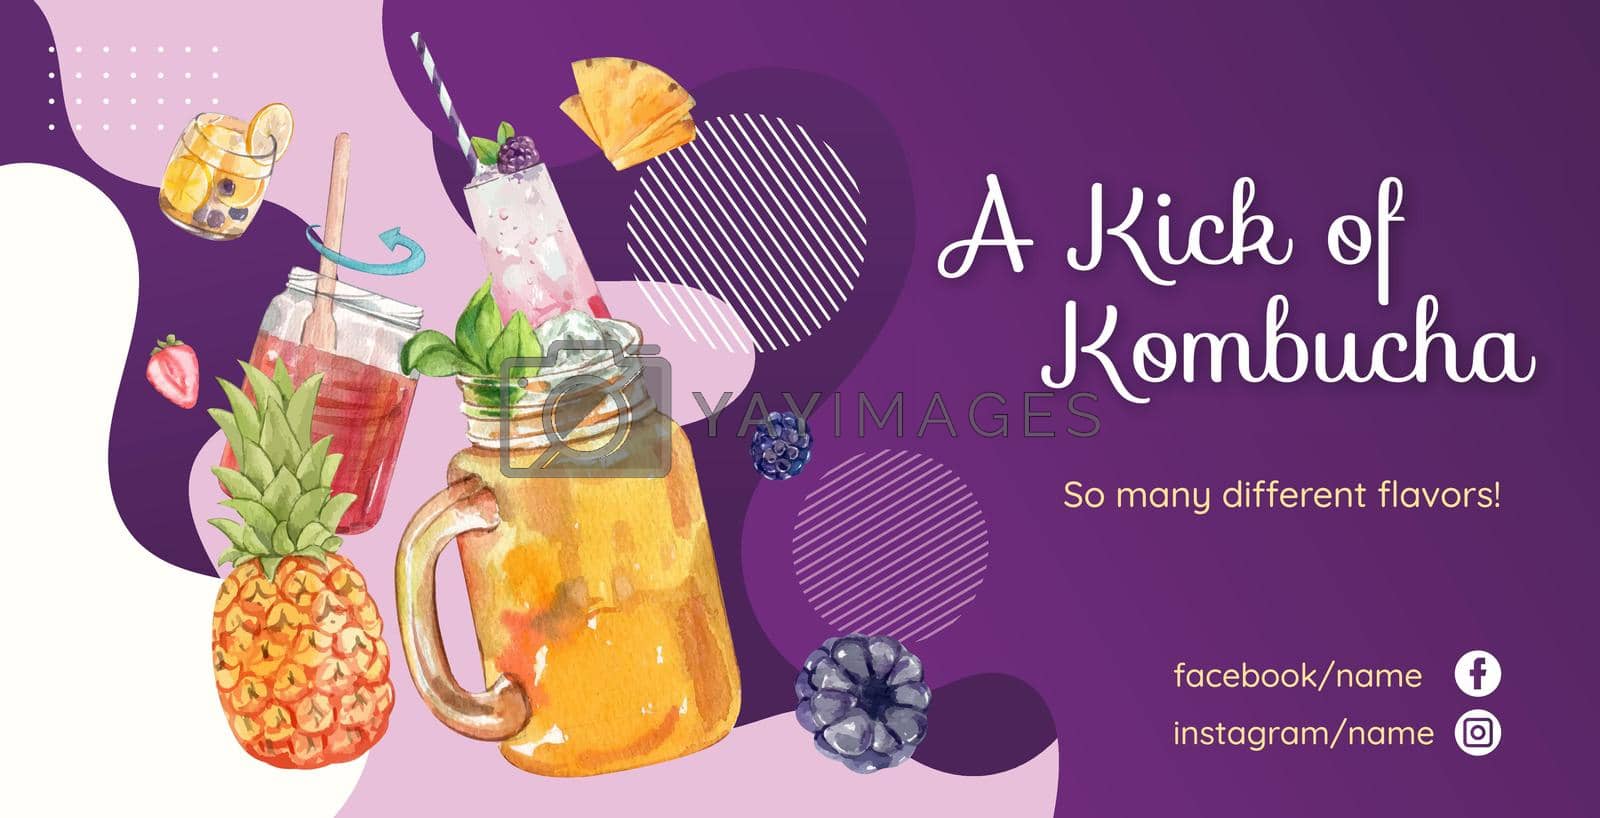 Billboard template with Kombucha drink concept,watercolor style
